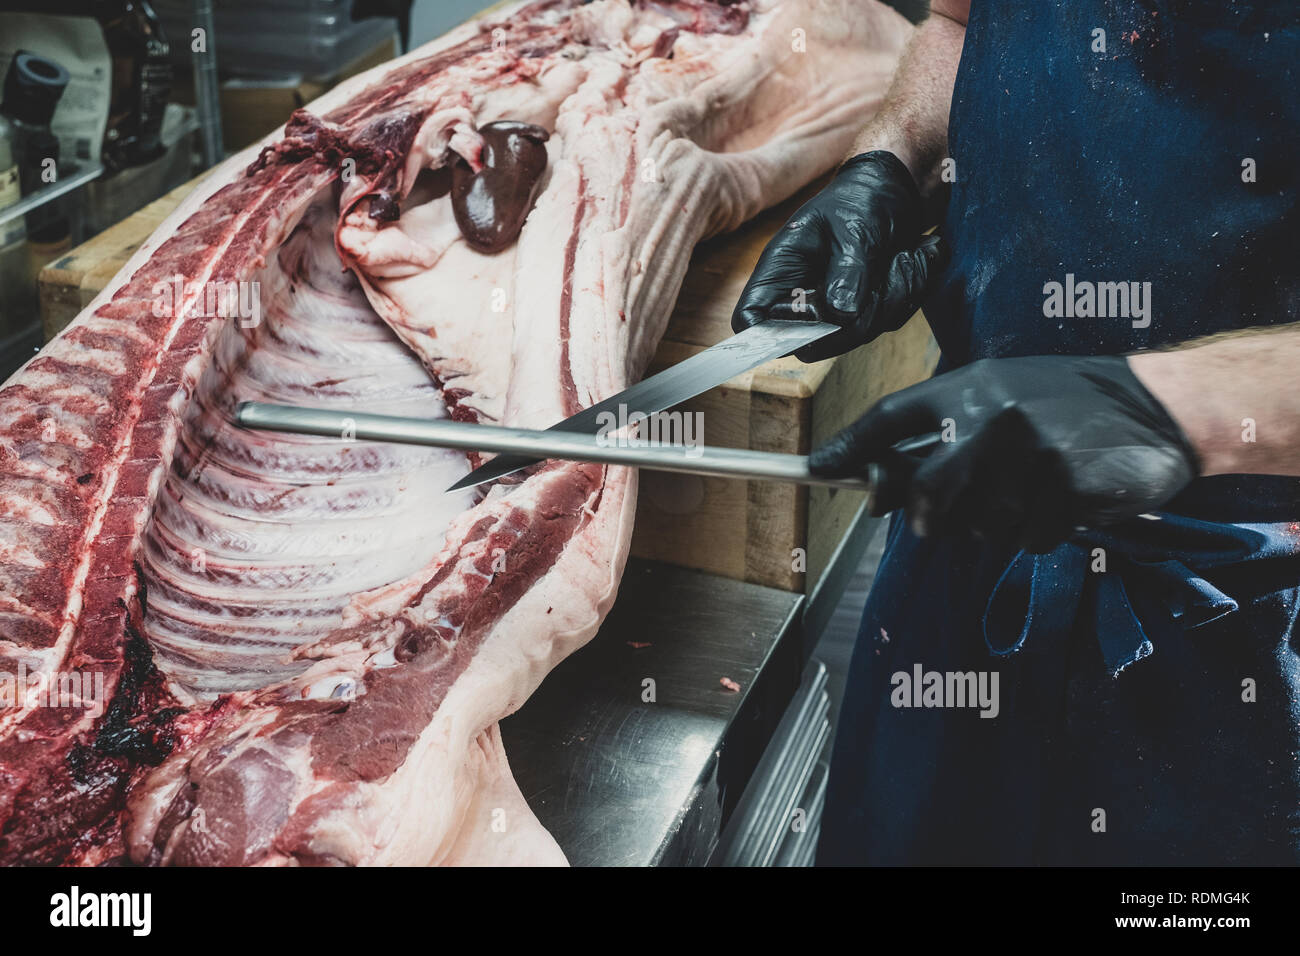 Close up of butcher wearing black rubber gloves working on a pig carcass on butcher's block, sharpening knife. Stock Photo